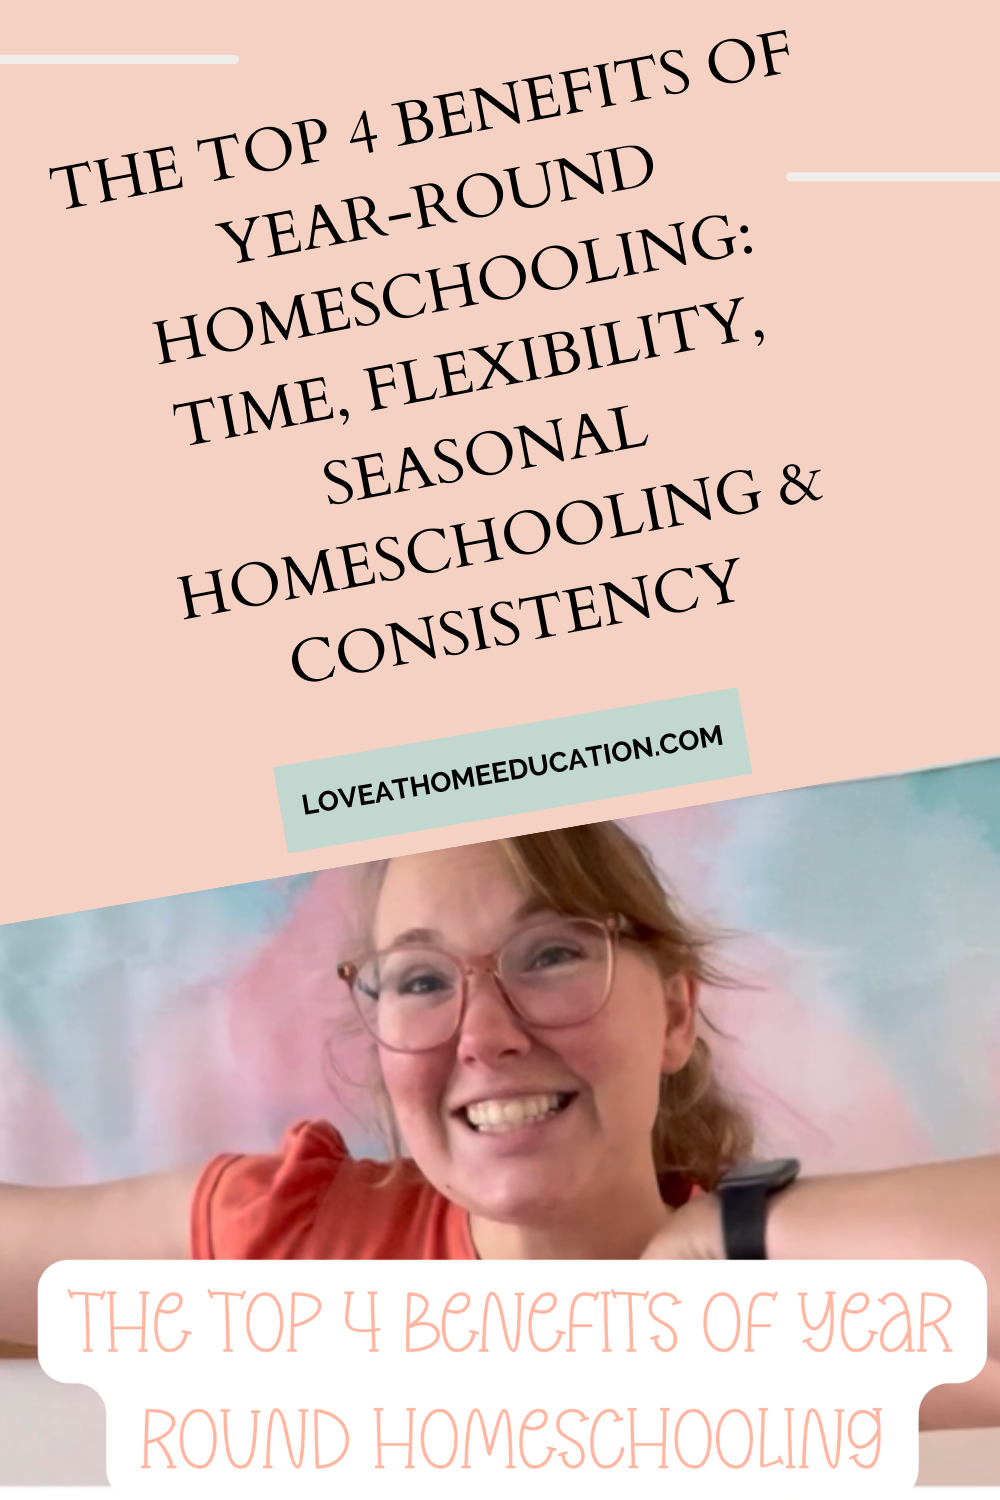 4 Benefits of Year-Round Homeschooling | Time, Flexibility, Seasonal, and Consistency